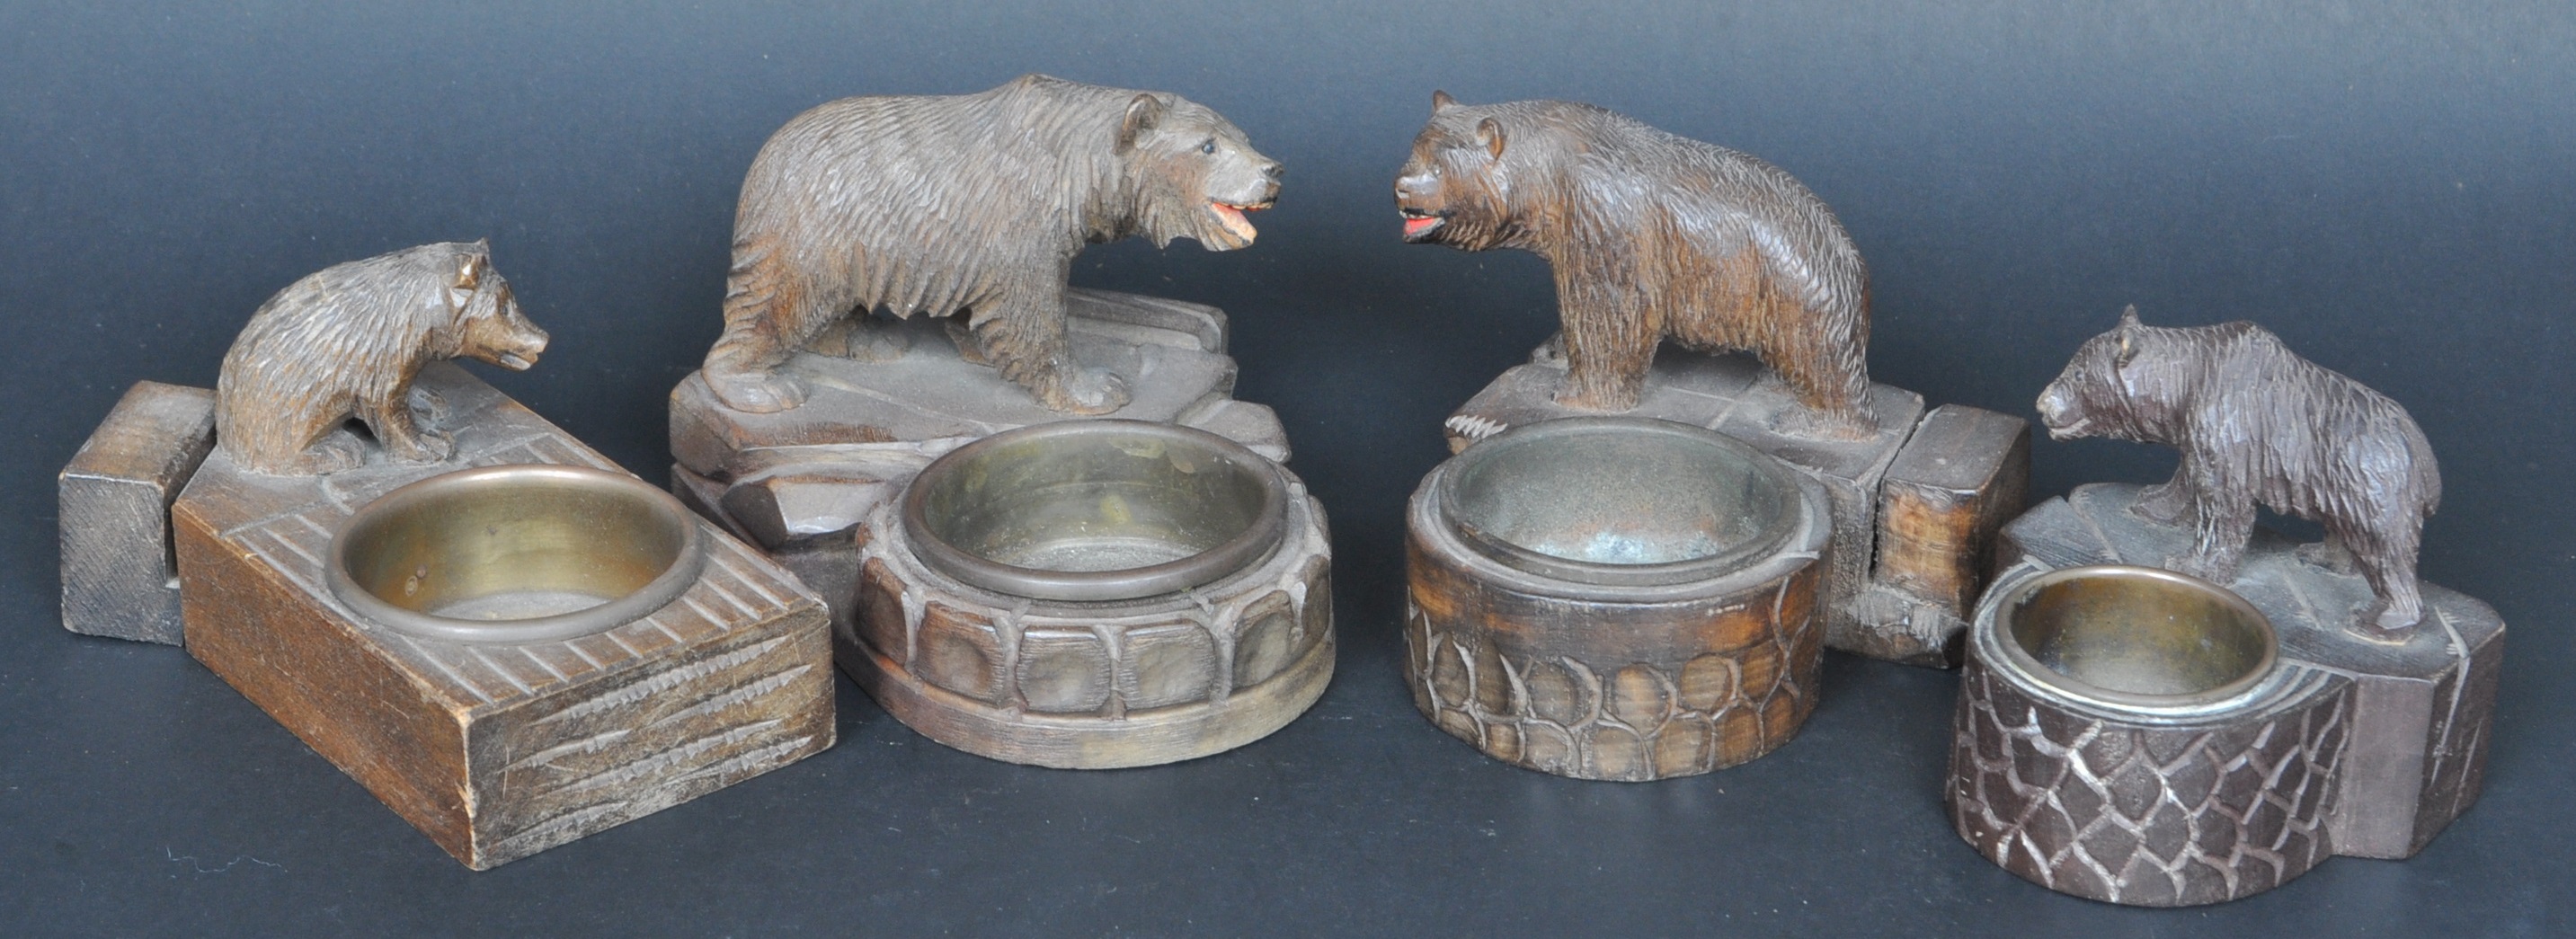 COLLECTION OF 19TH CENTURY HAND CARVED BLACK FOREST BEAR ITEMS - Image 2 of 6